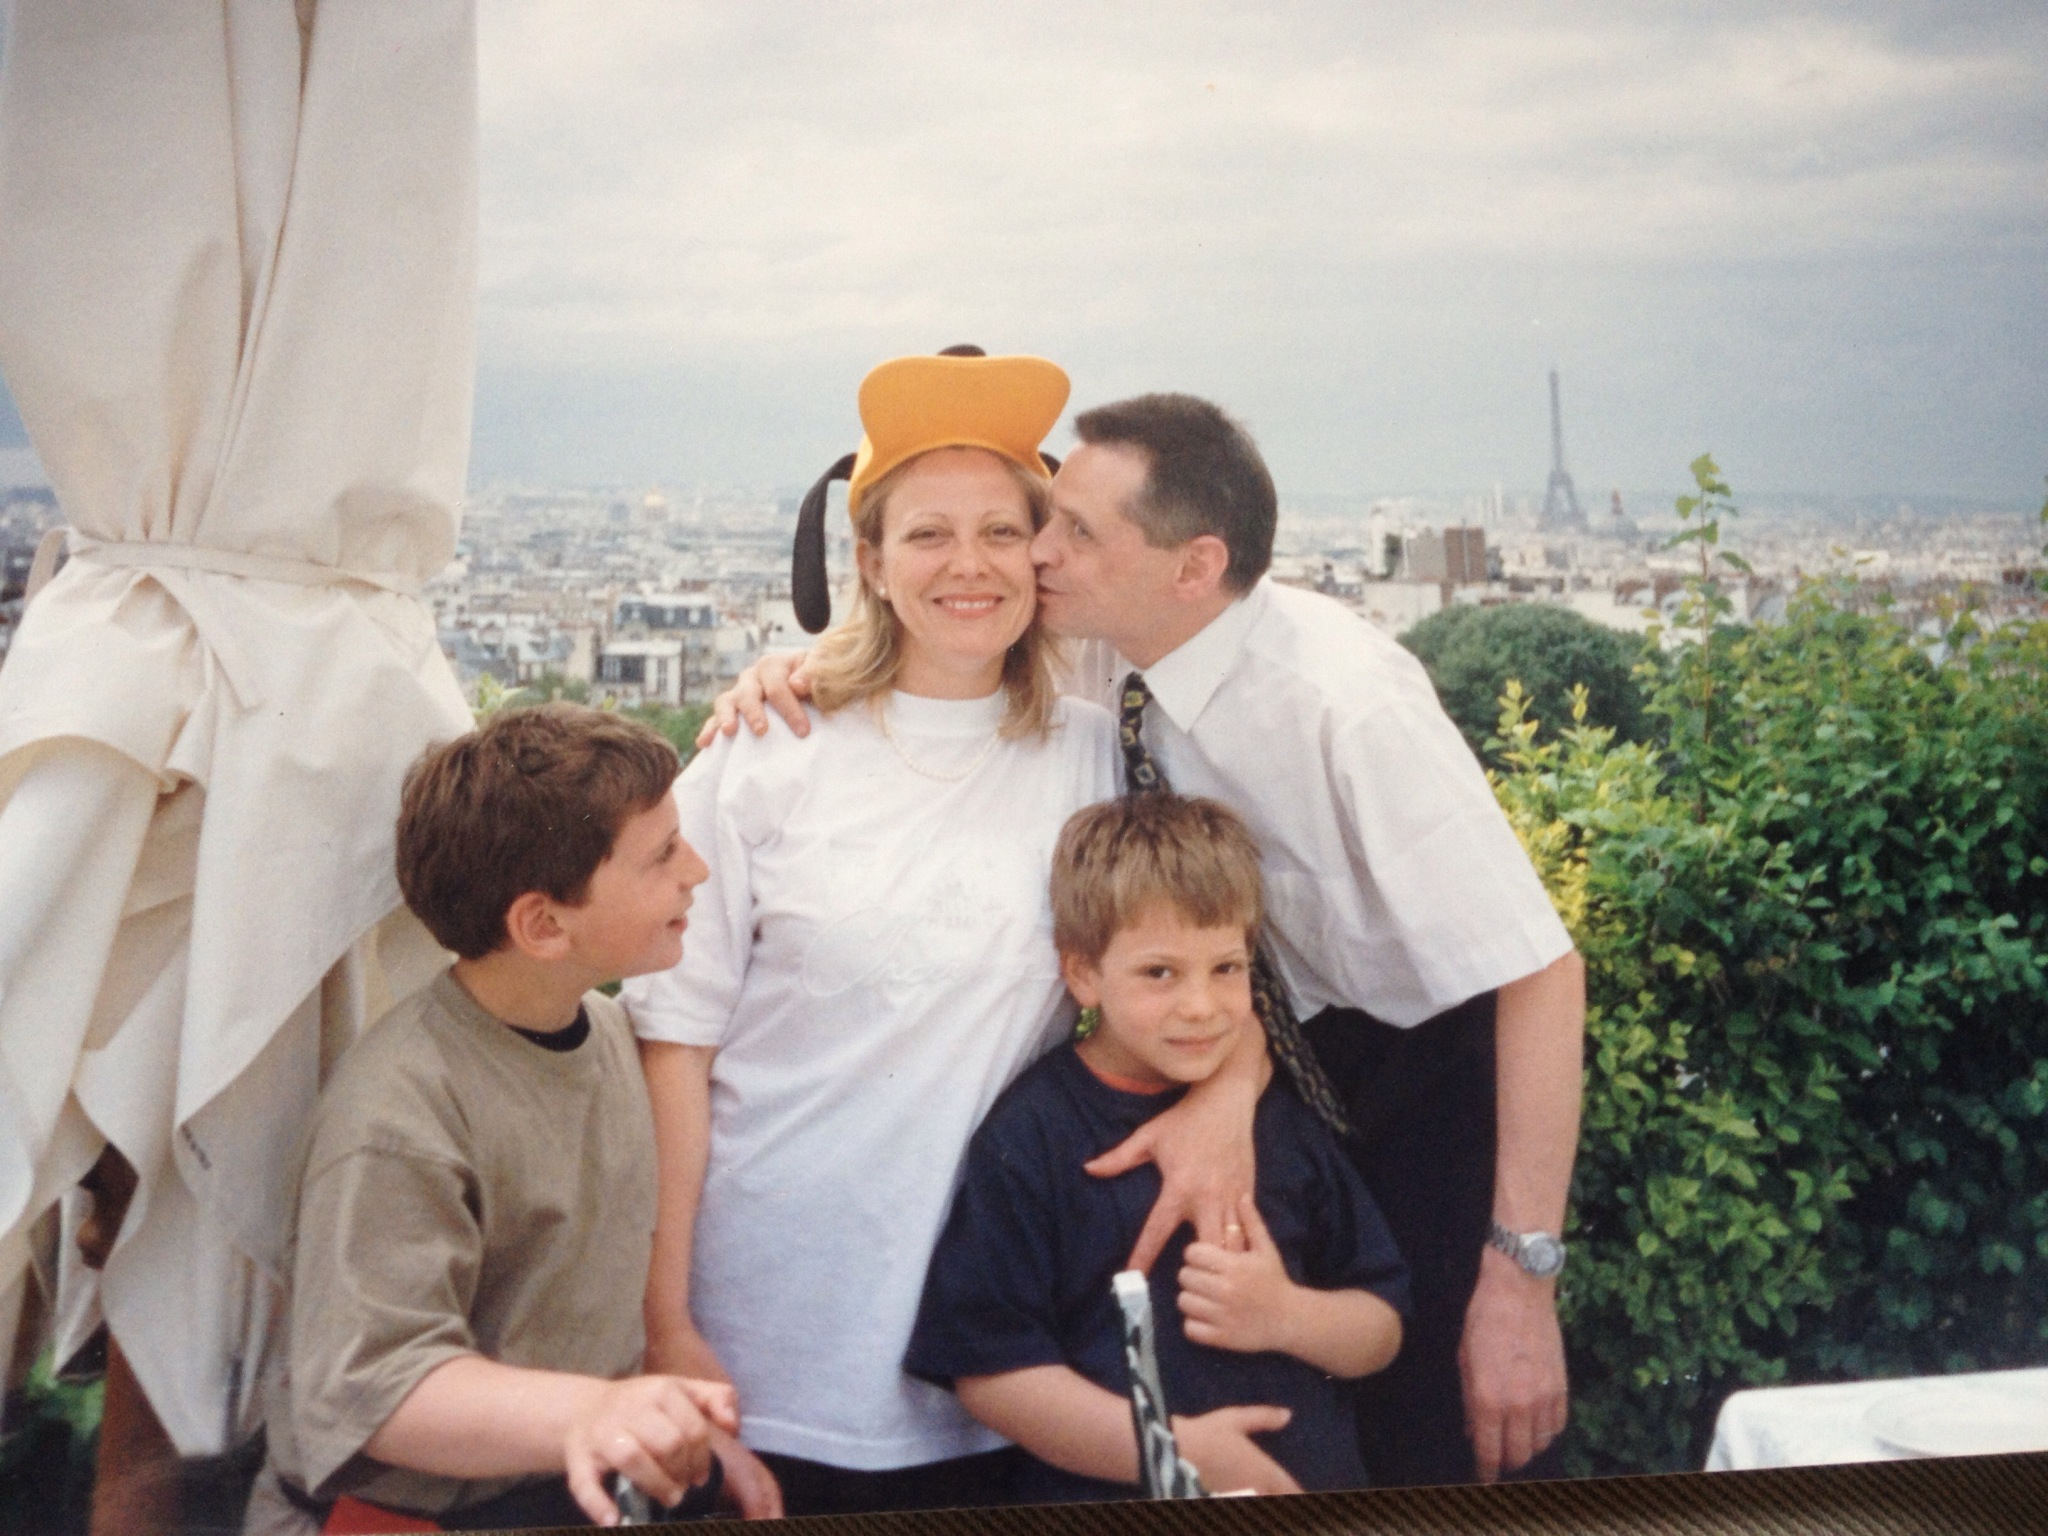 another pic from childhood yes, still in Paris.